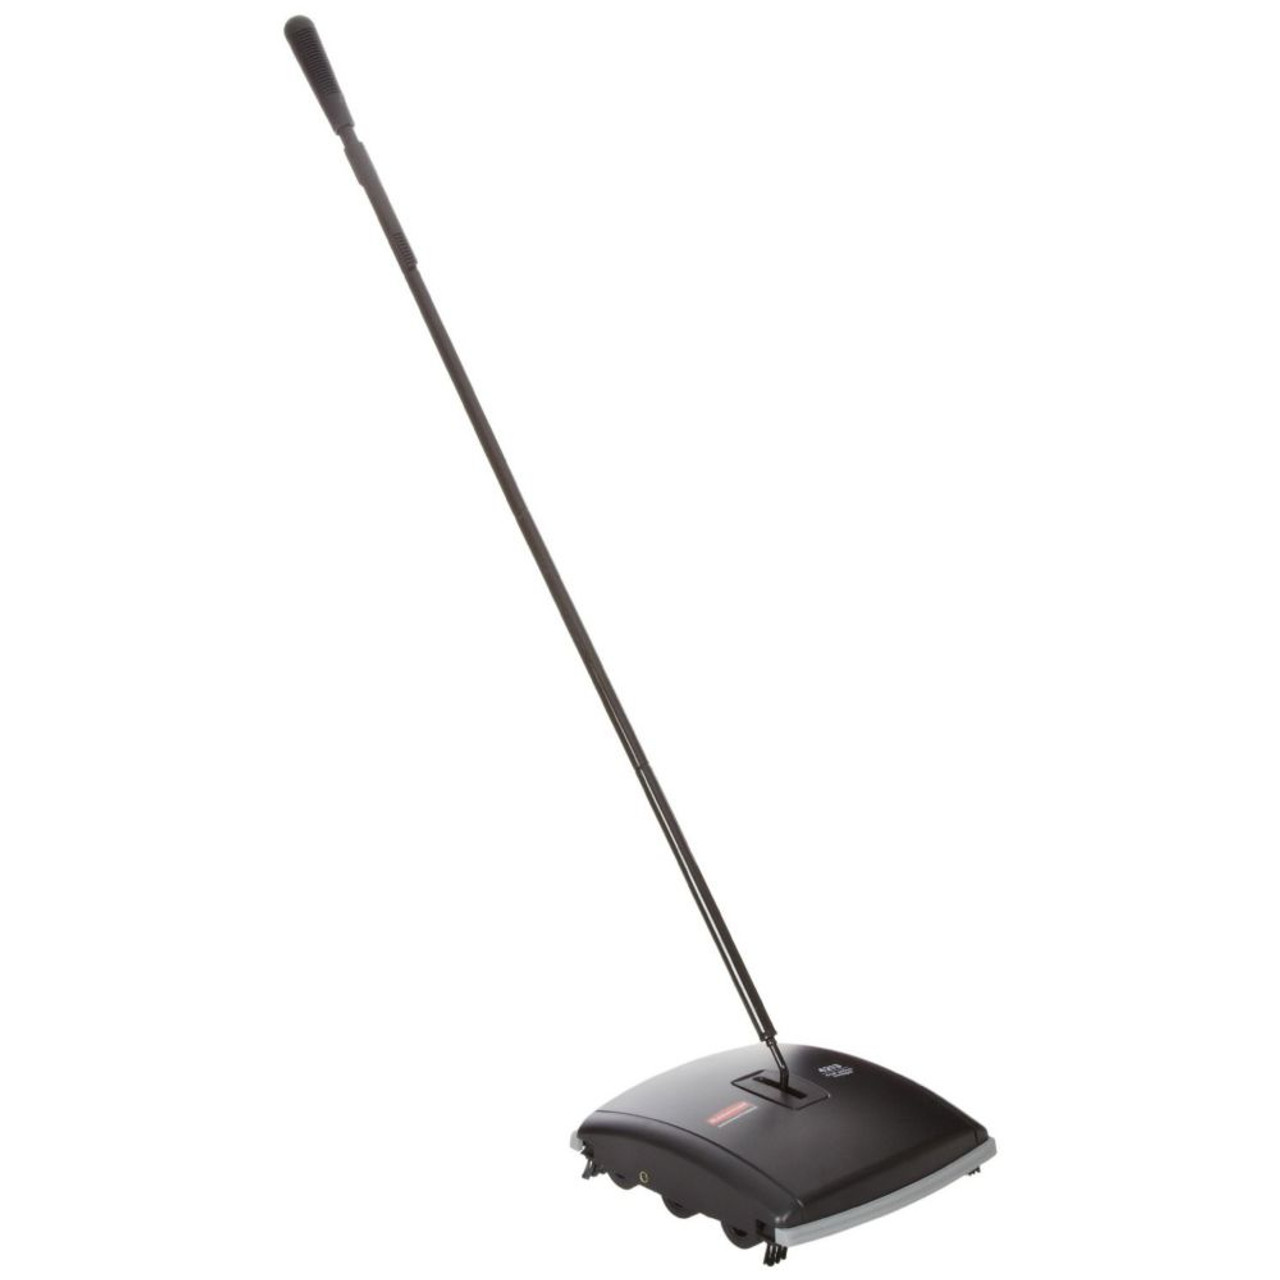 Rubbermaid Commercial Dual Action Mechanical Sweeper Black FG421388BLA for sale online 